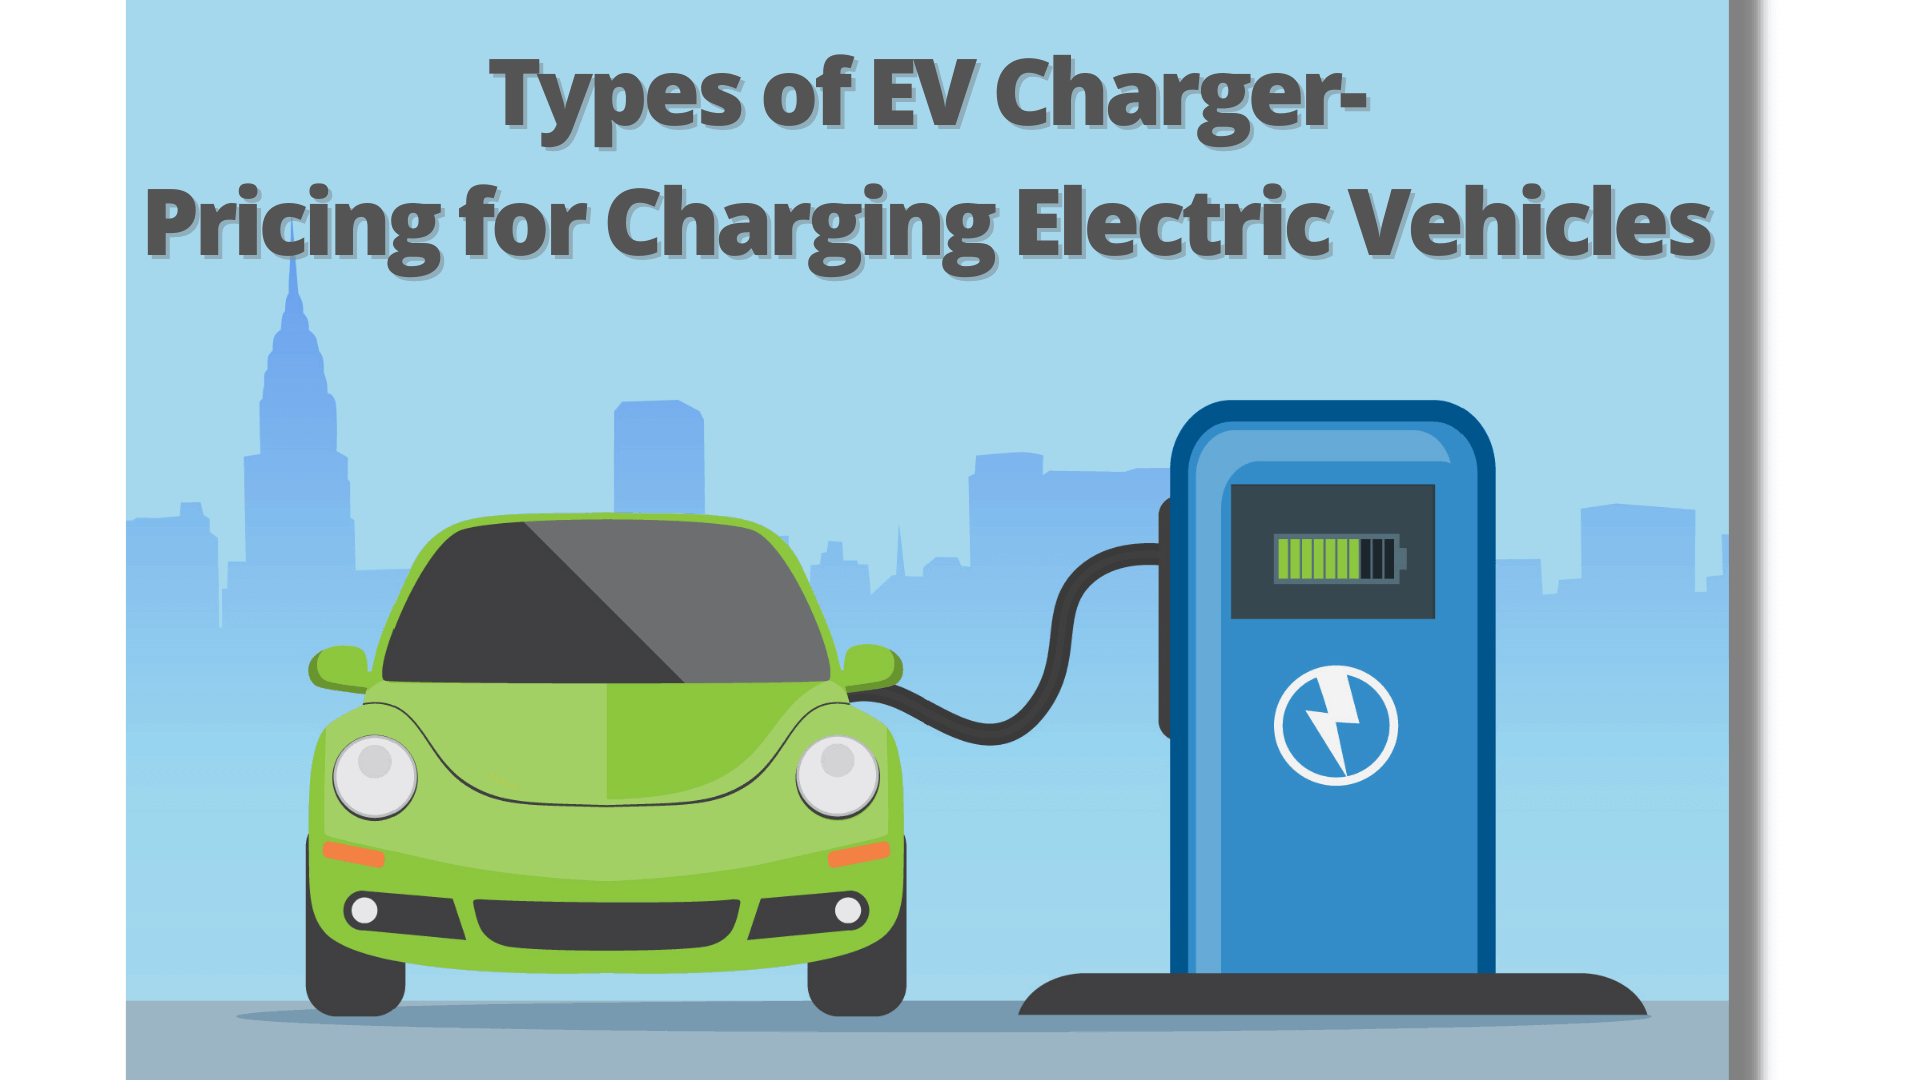 https://e-vehicleinfo.com/types-of-ev-charger-pricing-for-charging-electric-vehicles/